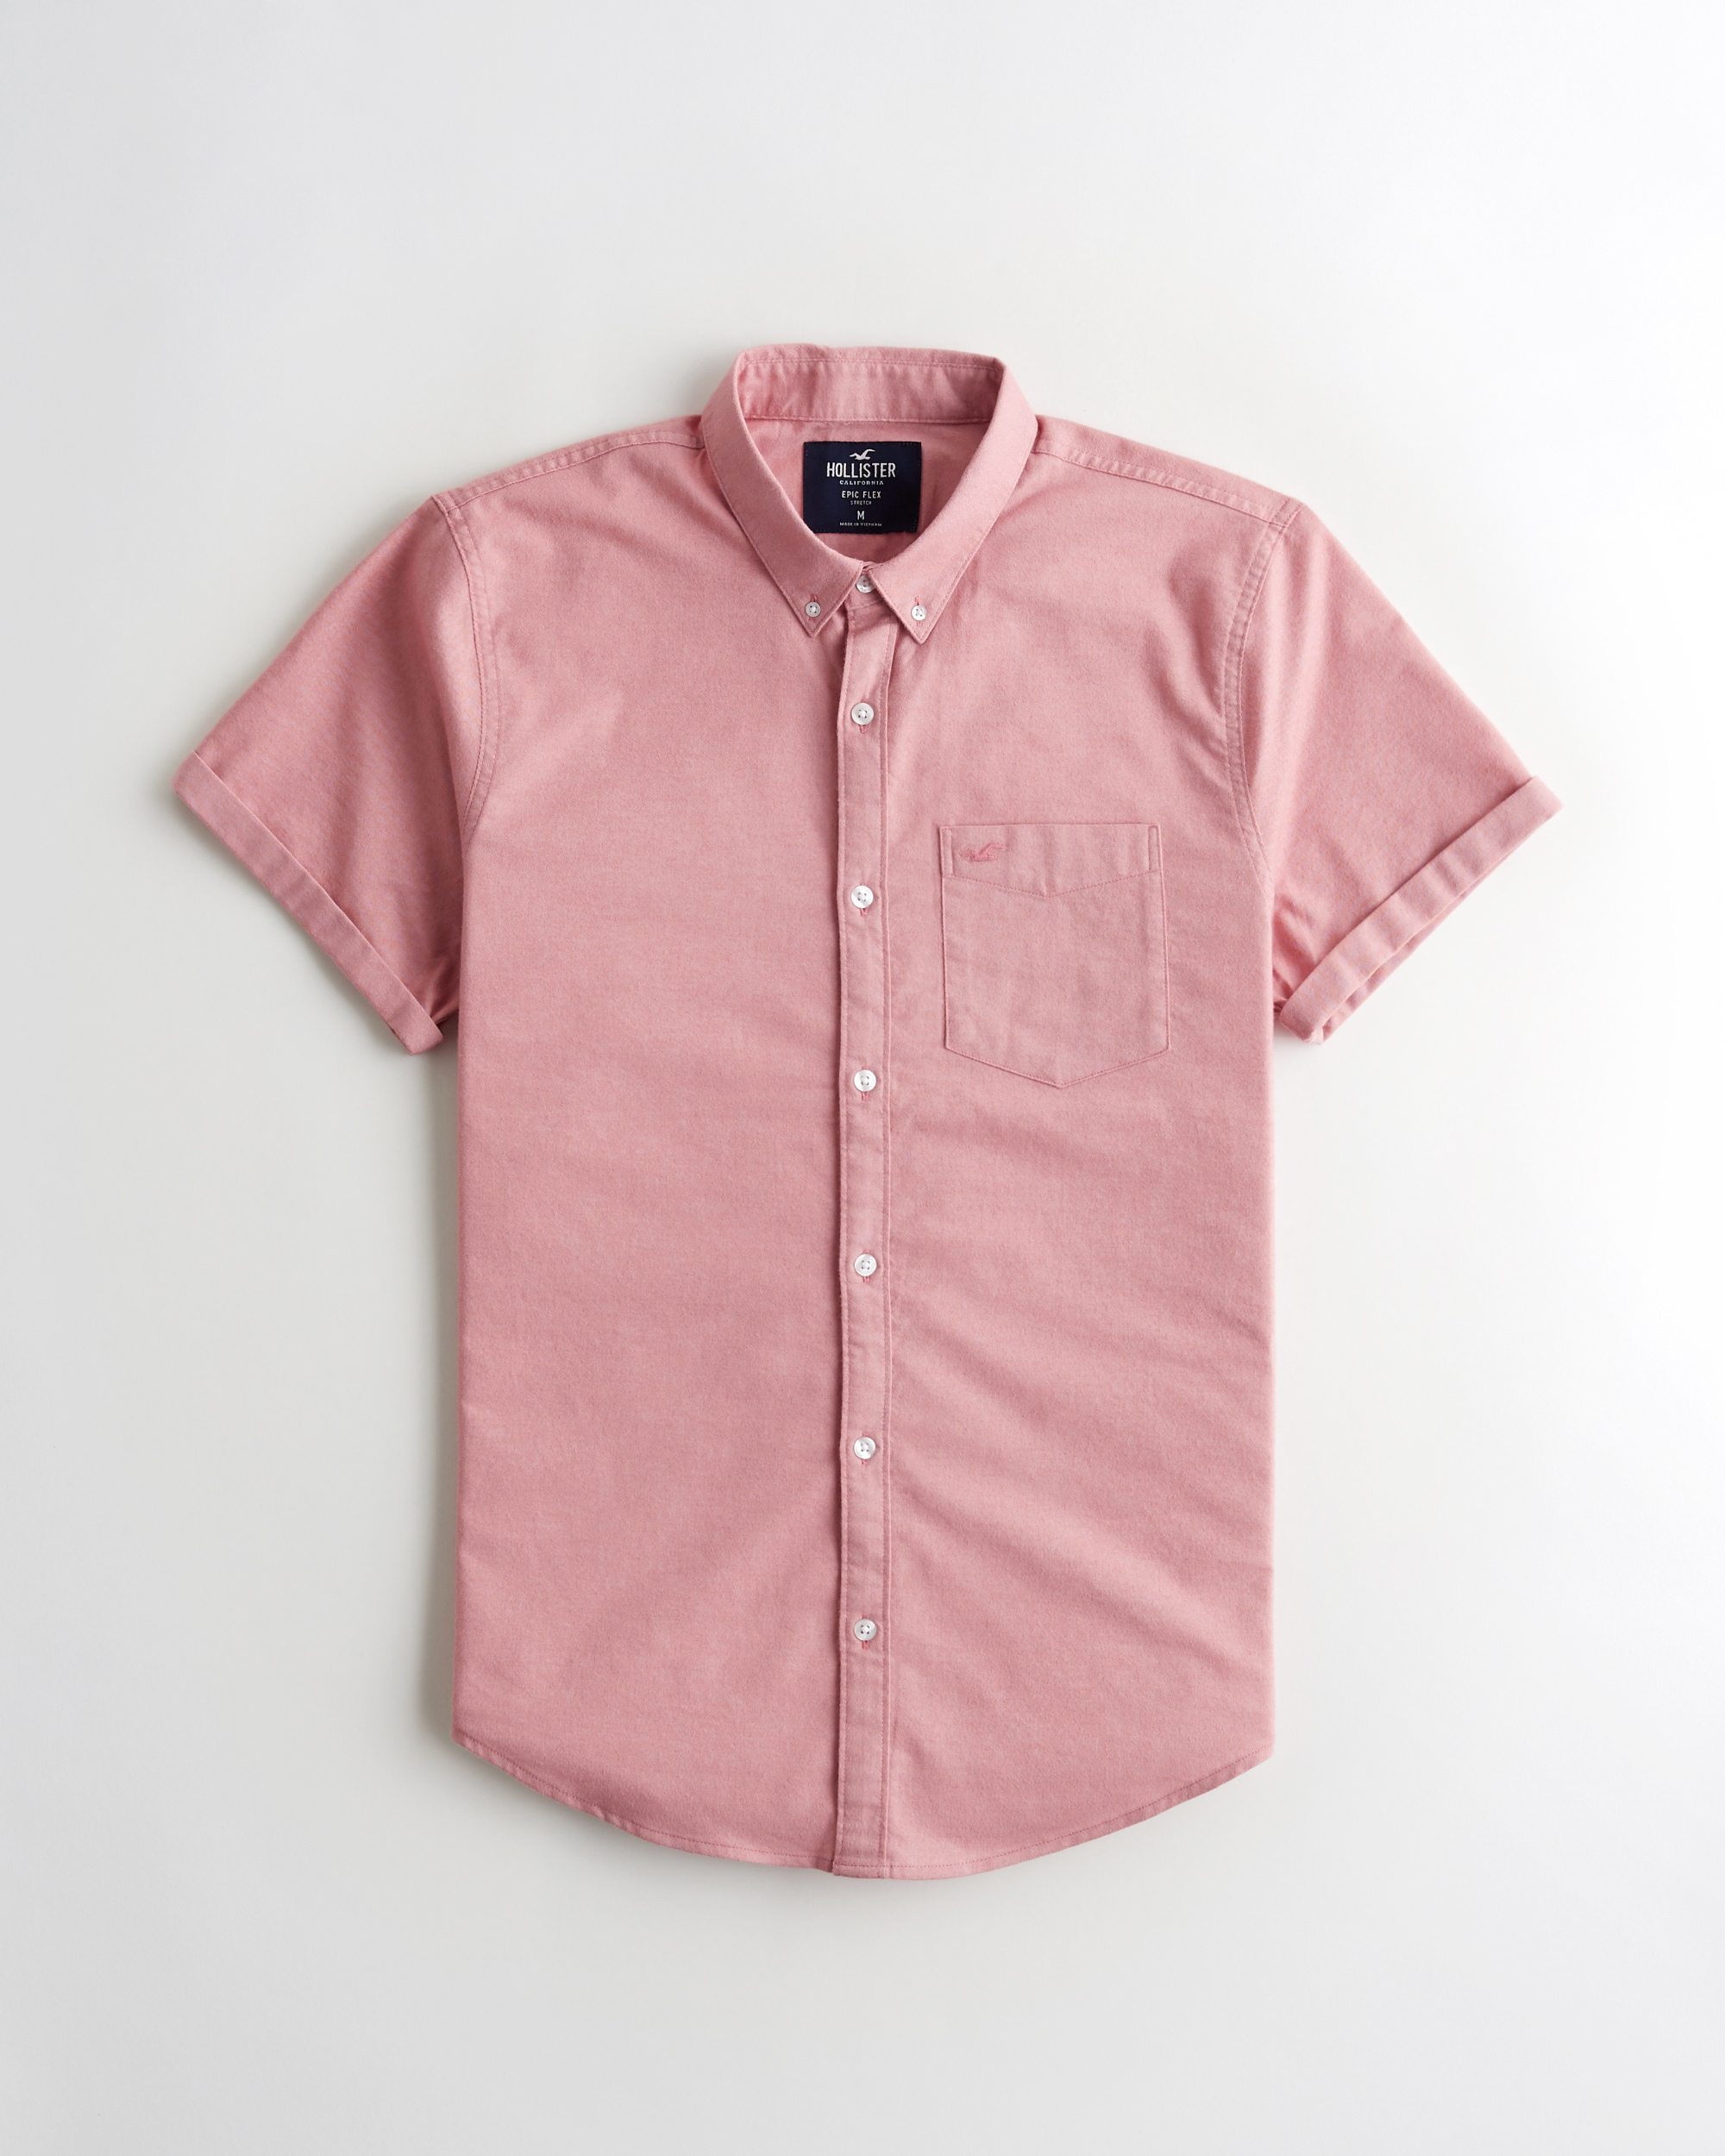 Button Down Shirts for Guys | Hollister Co.